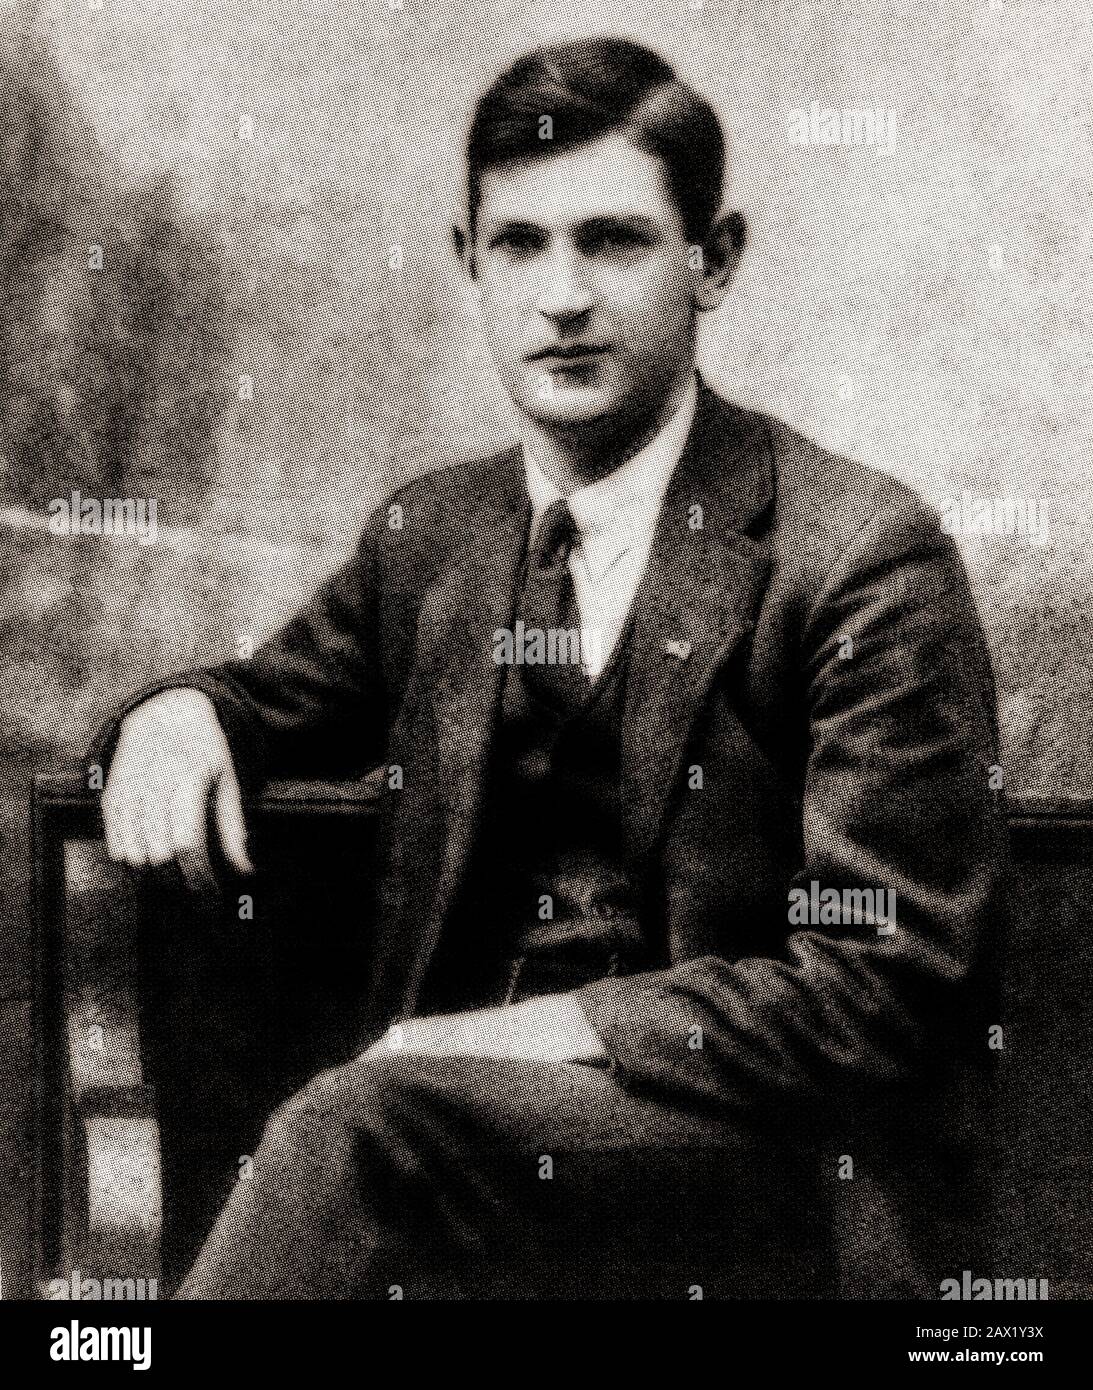 Michael Collins after release from Frongoch internment camp, Christmas 1916. Following the failure of the 1916 Easter Rising, Collins and thousands of other rebels were arrested by the British authorities. Many of the the uprising’s leaders were executed. Collins was fortunate not to be executed despite having fought at the Dubin GPO, the centre of the uprising. Collins and the other rebels were later imprisoned at Frongoch, an old whisky distillery near Bala, Wales, where he was one of the organisers of non-cooperation with the British authorities. Stock Photo